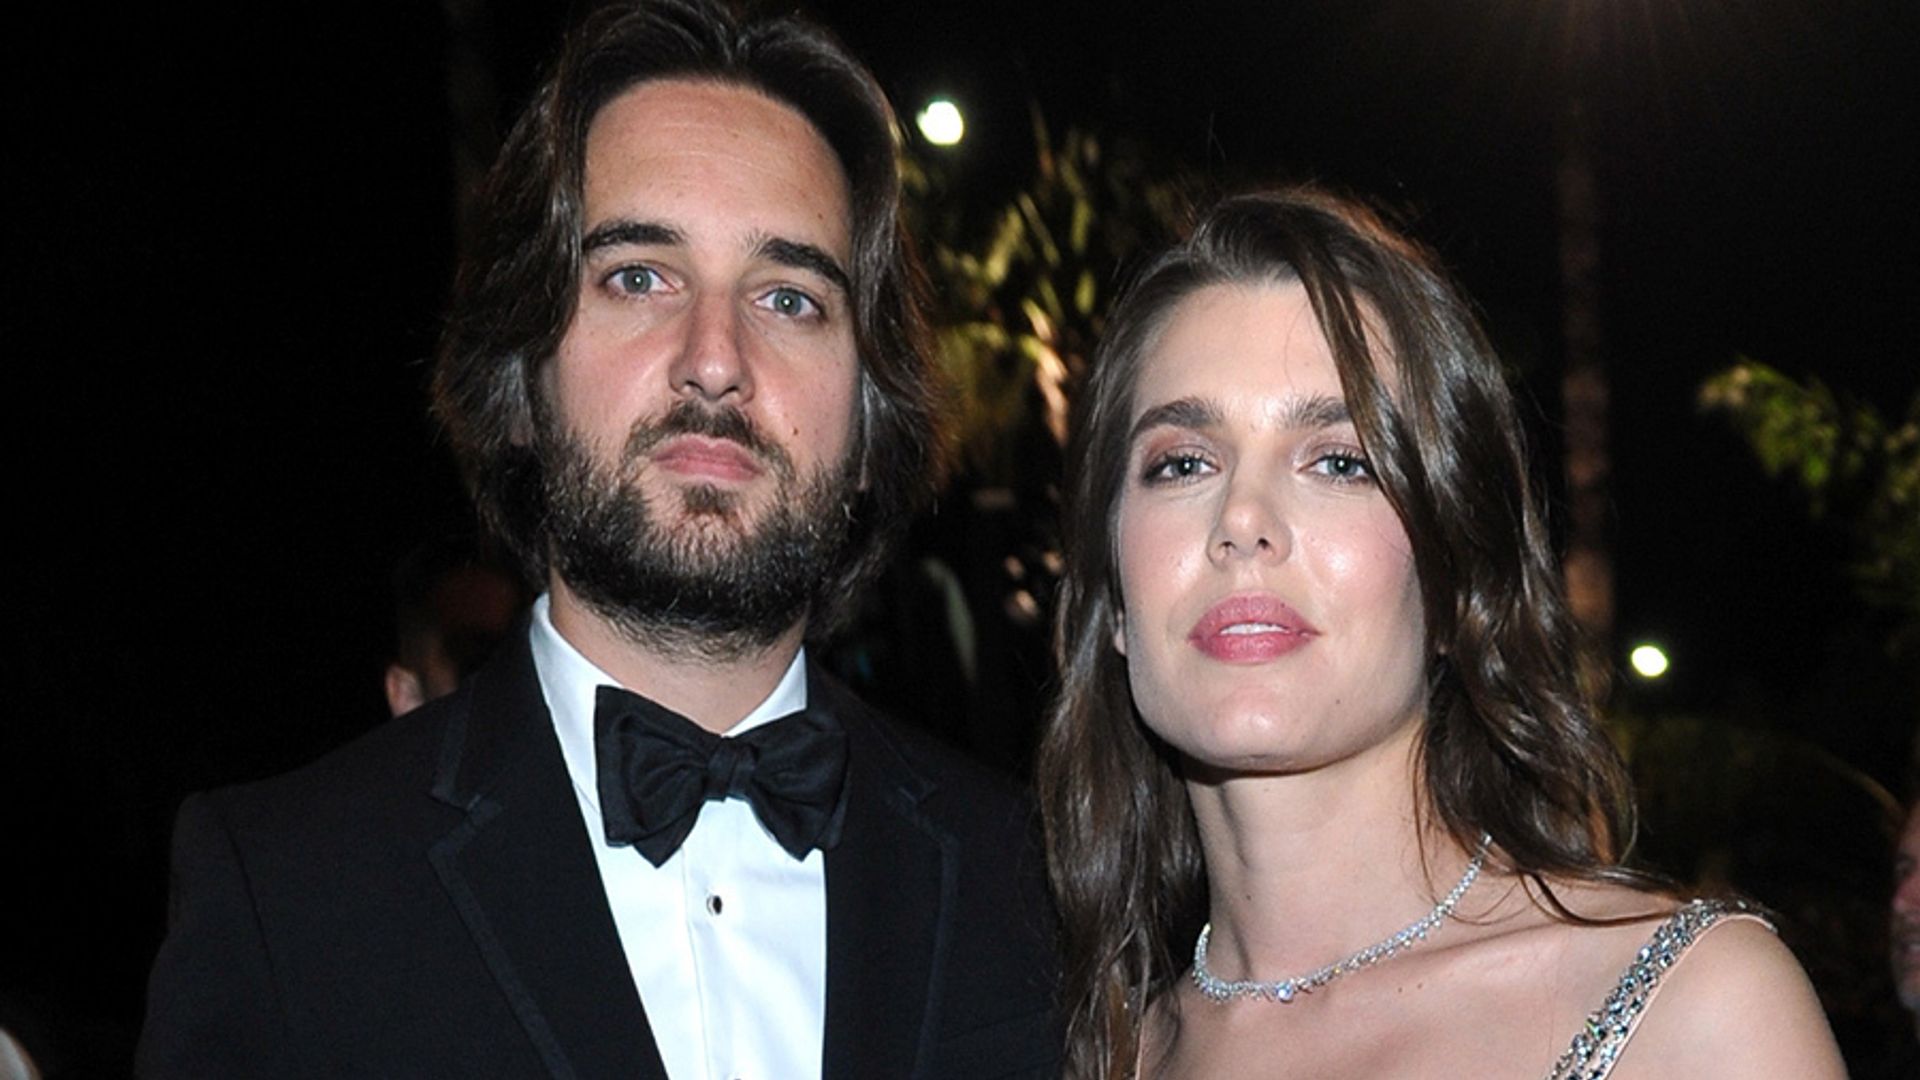 Charlotte Casiraghi and Dimitri Rassam set to wed this weekend